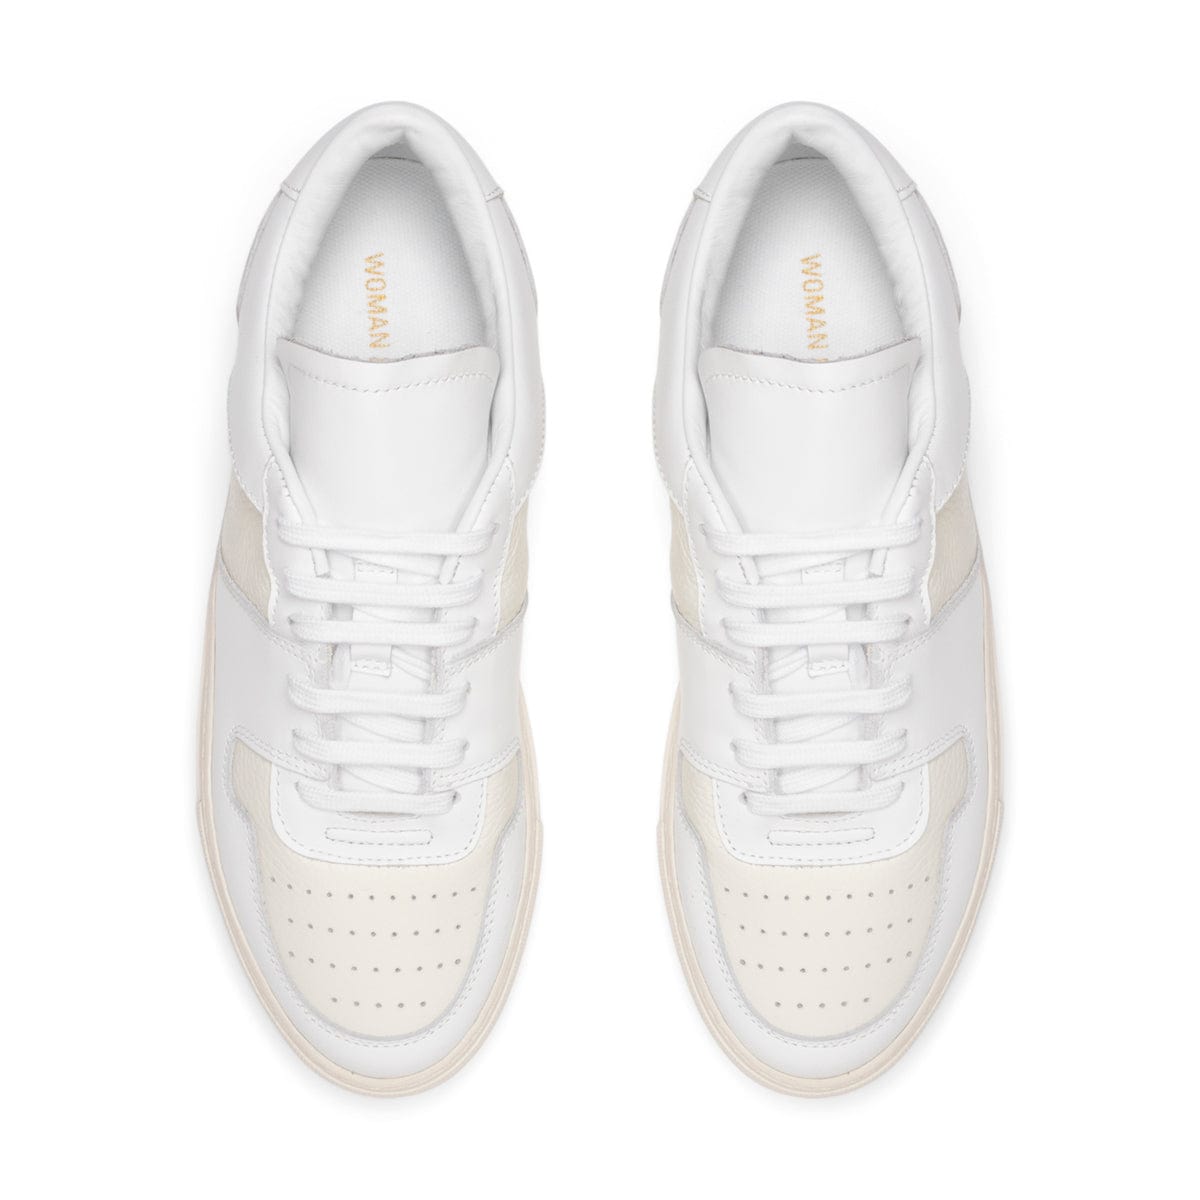 Common Projects Womens WOMEN'S DECADES LOW